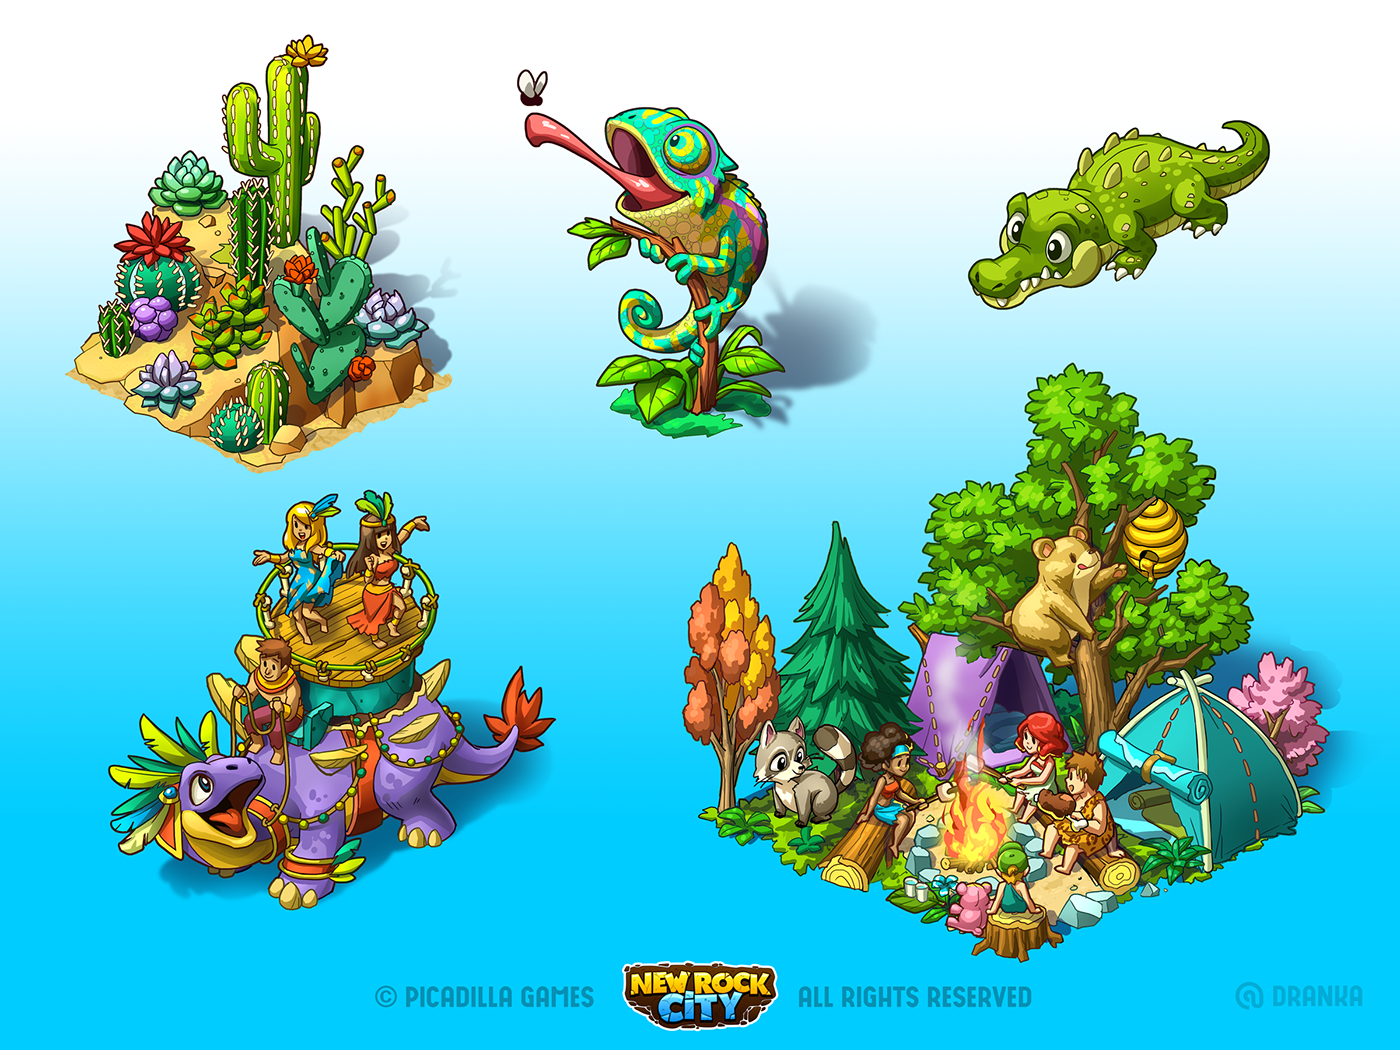 Isometric Game Art cartoon cell-shaded cute animals